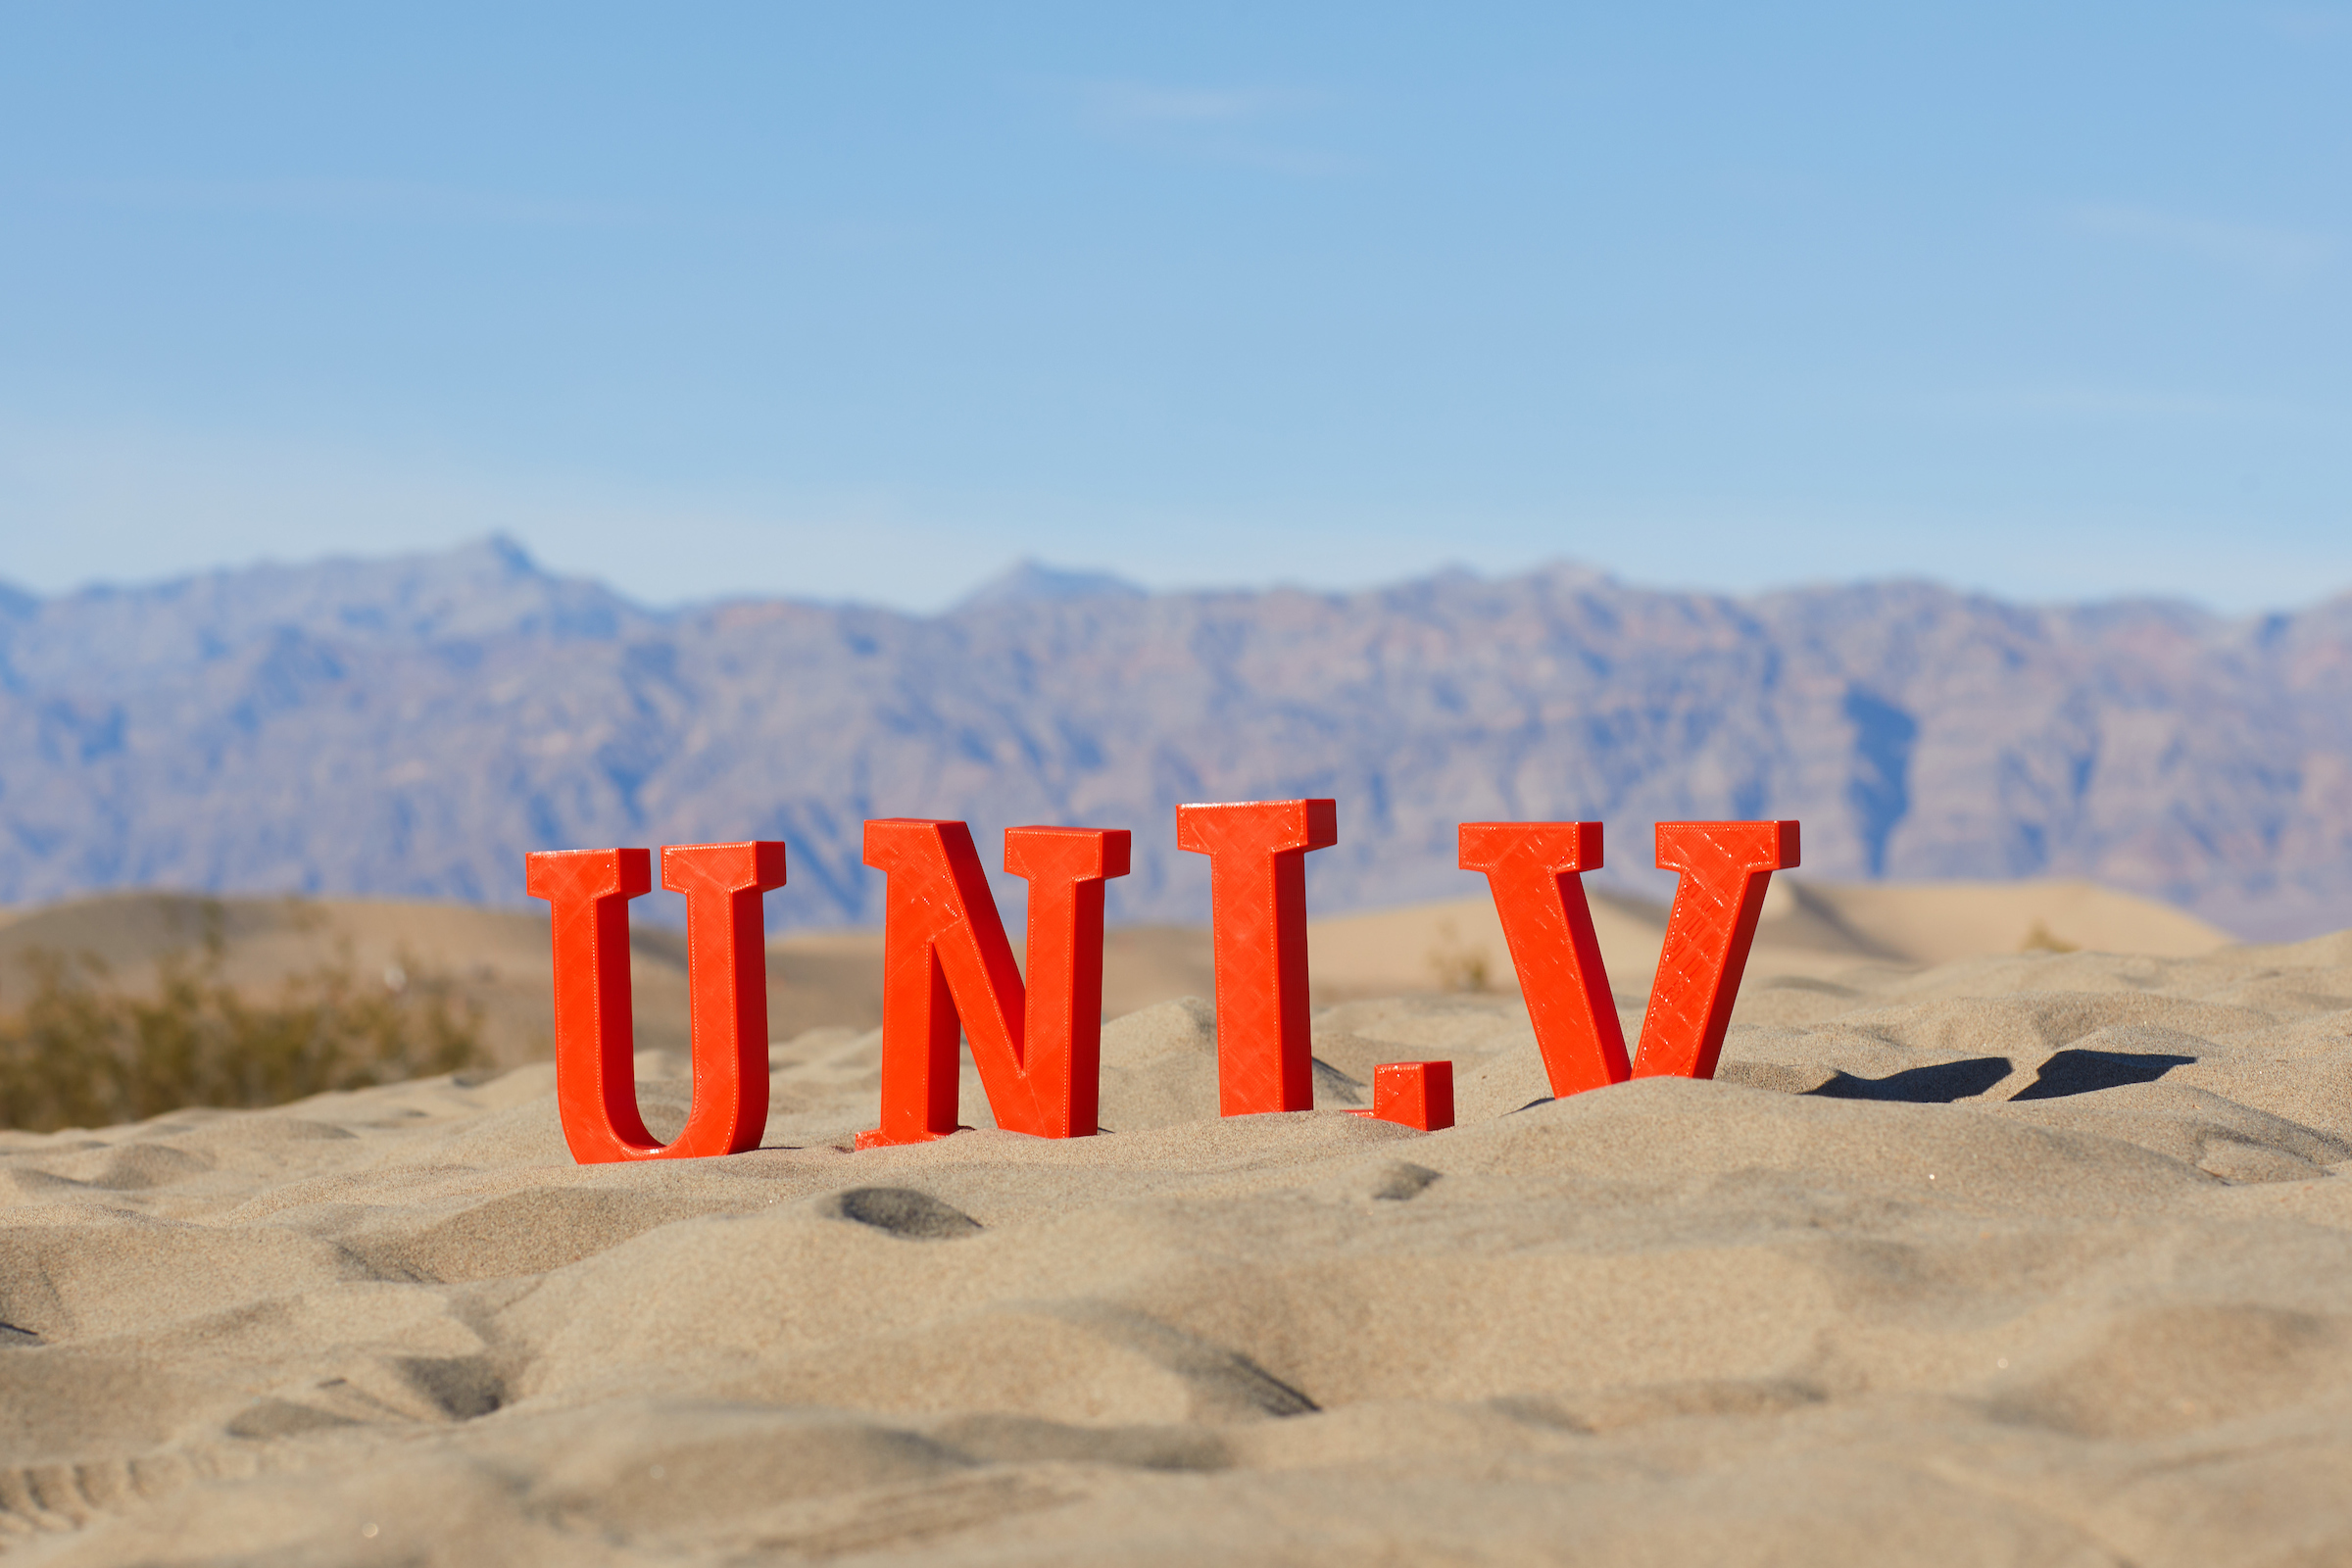 UNLV letters on sand with desert background